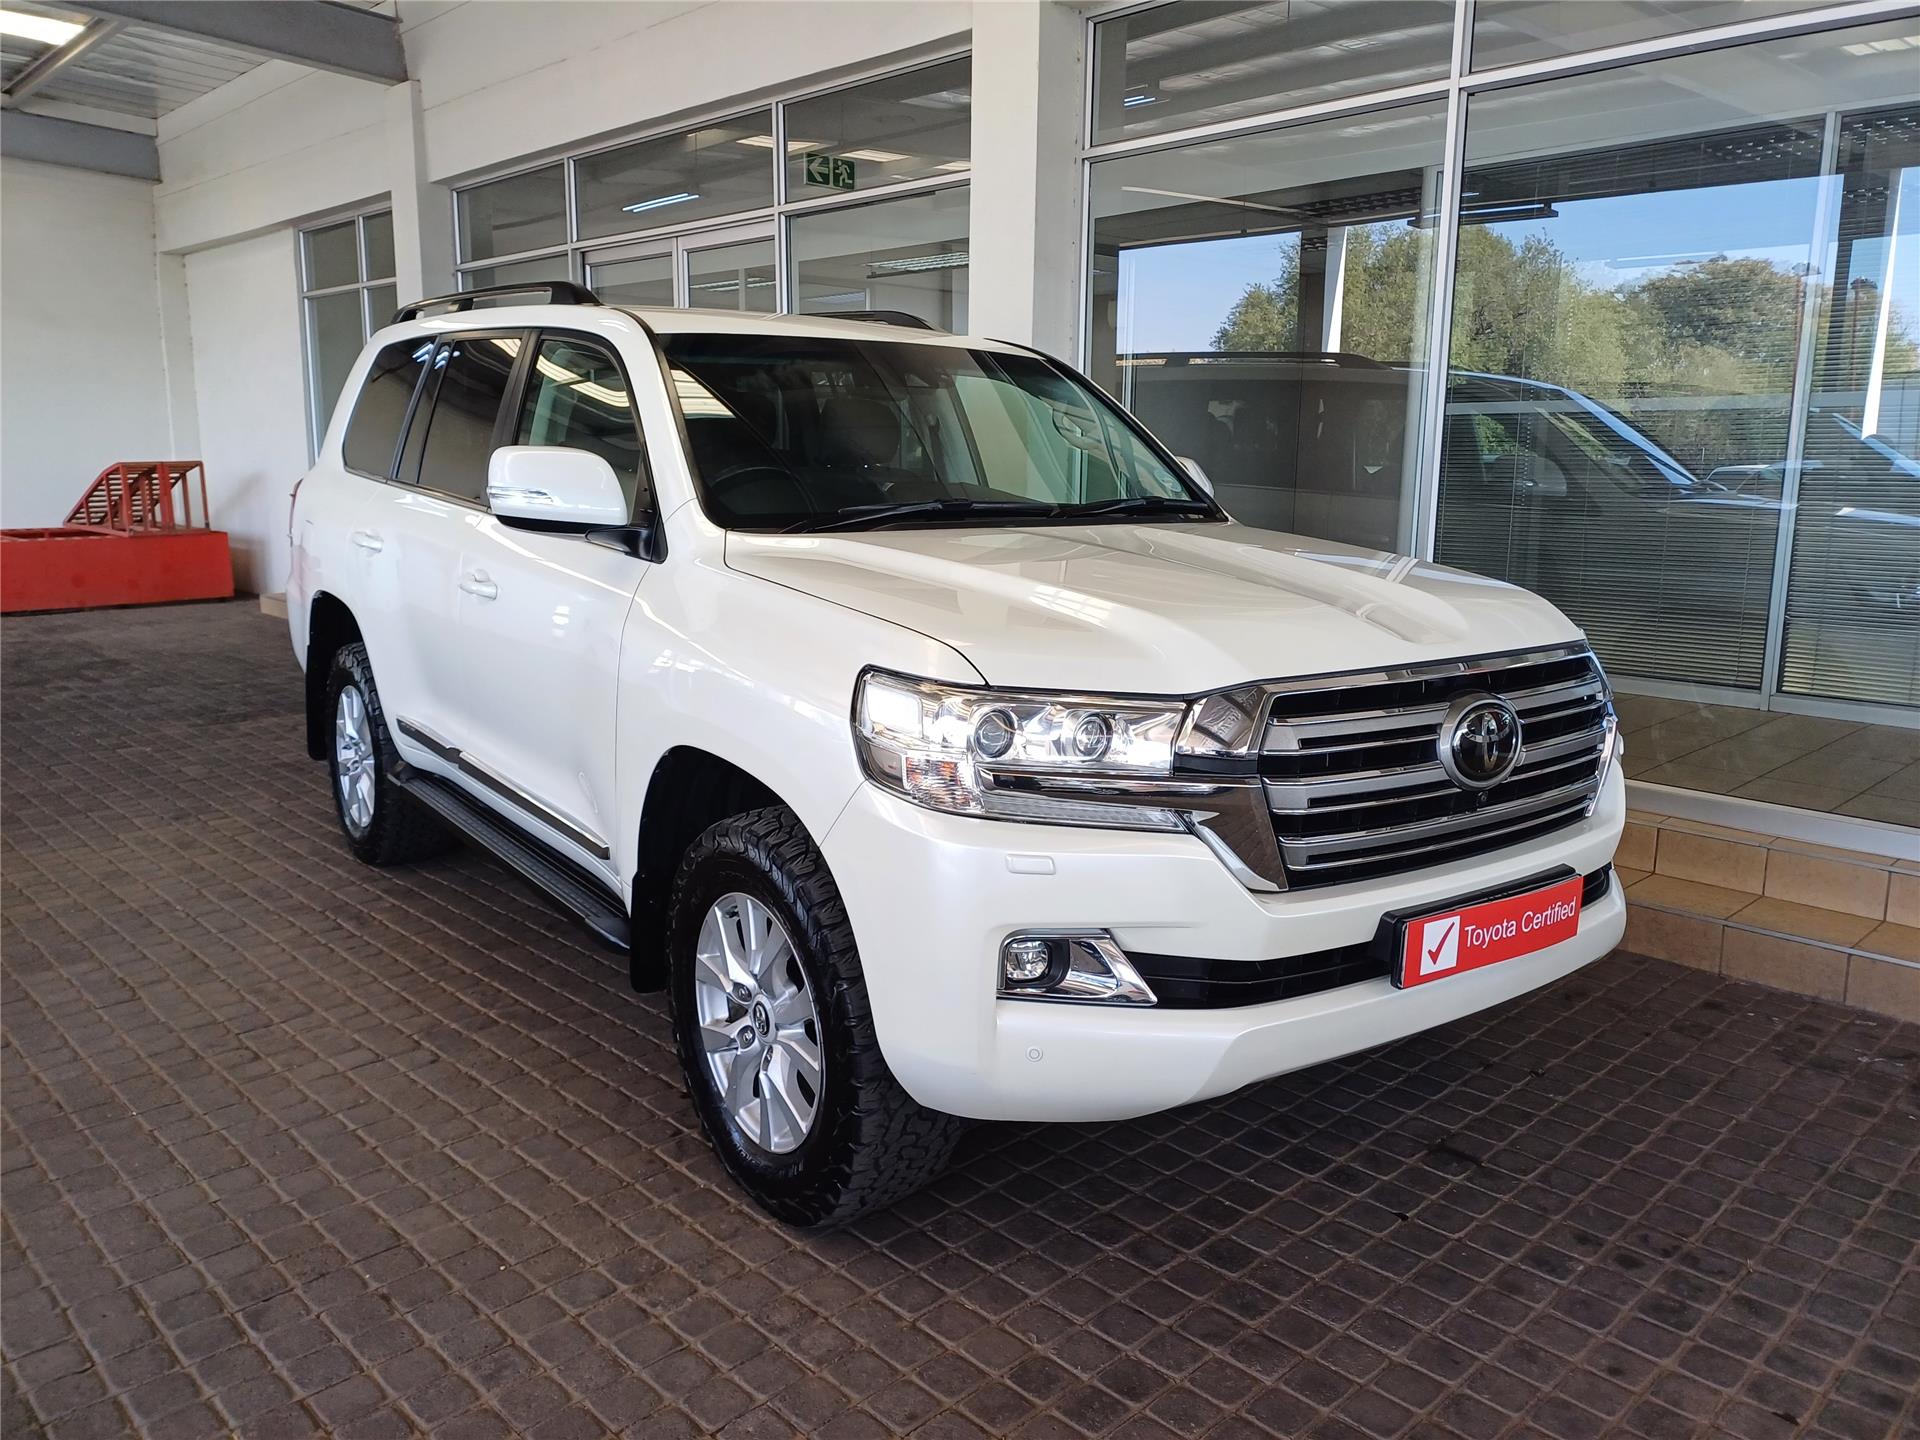 2018 Toyota Land Cruiser 200  for sale - 701747/1